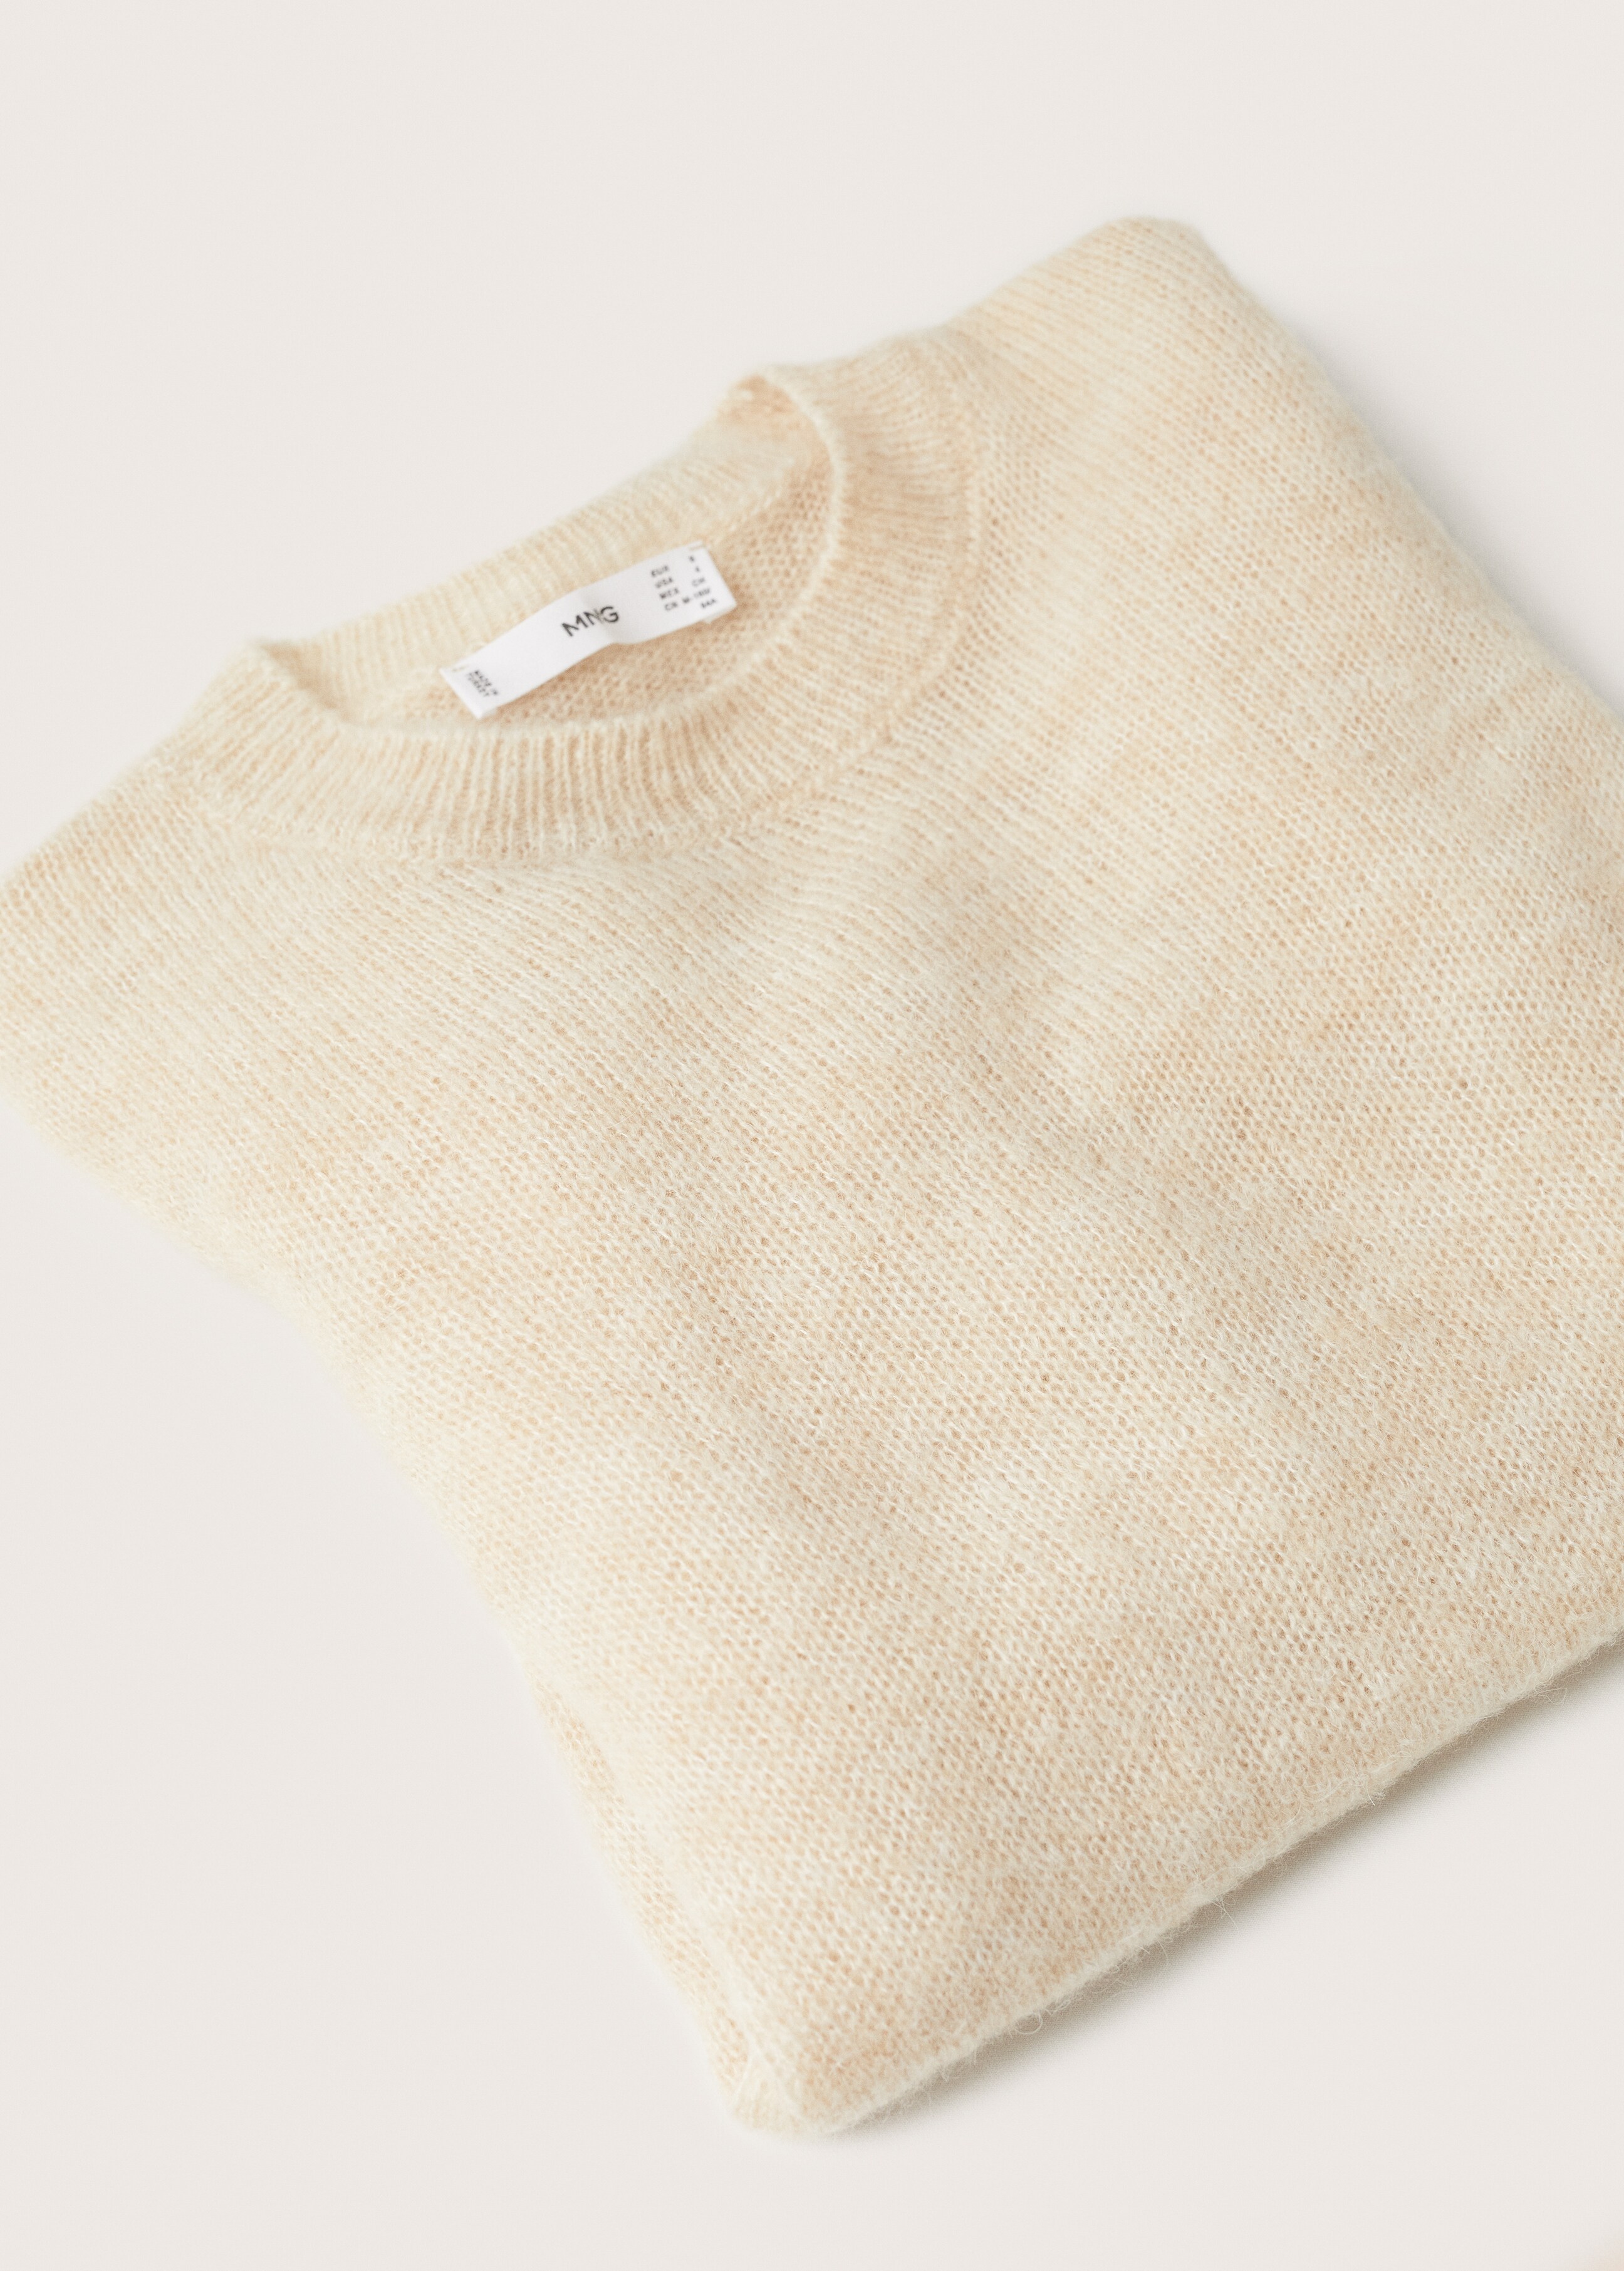 Fine-knit sweater - Details of the article 8